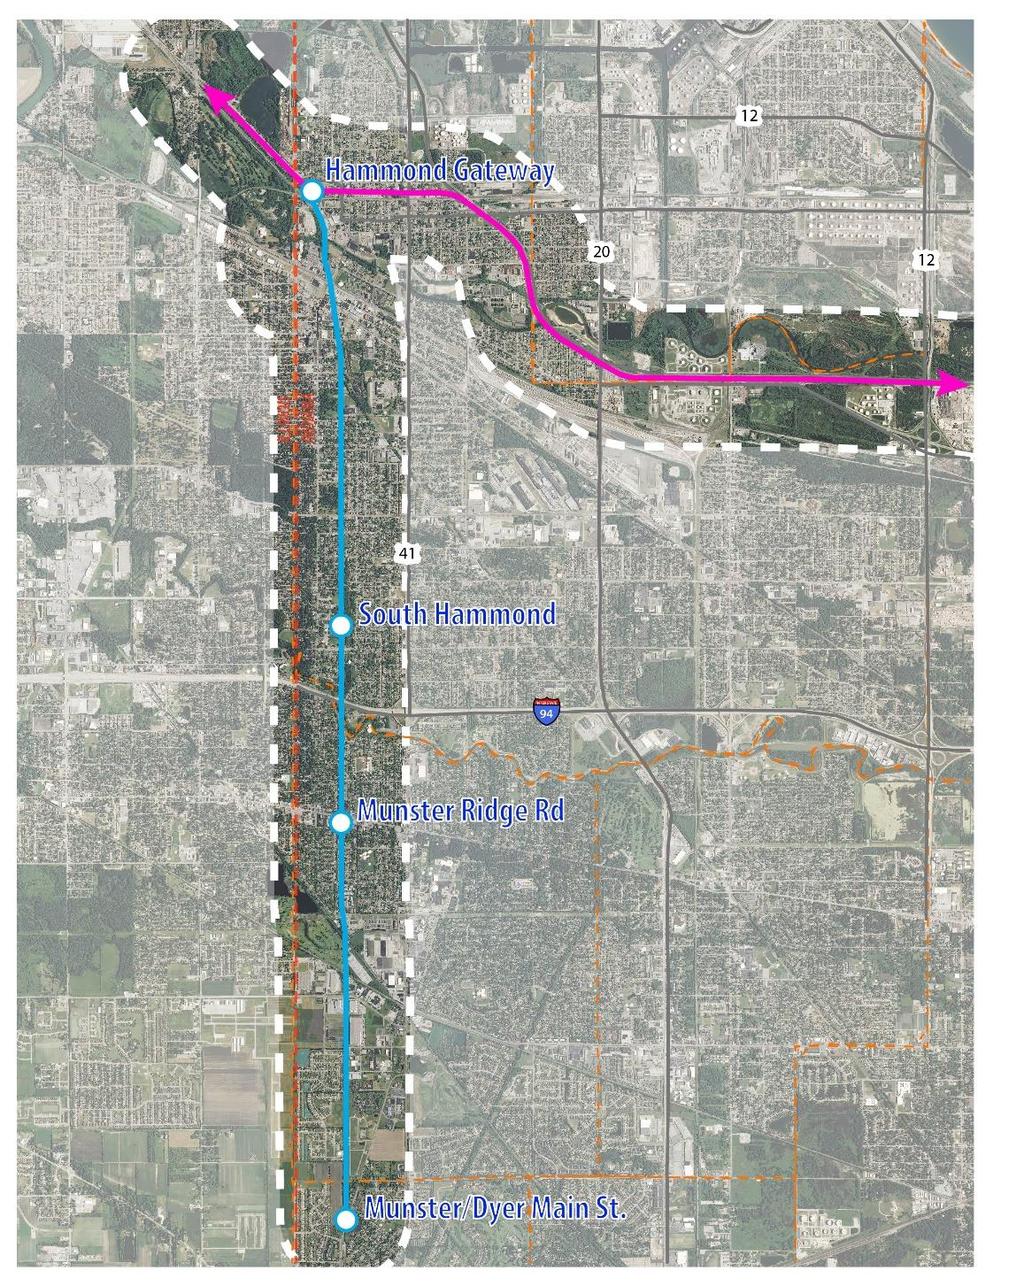 THE WEST LAKE & DOUBLE TRACKING PROJECT TRANSFORMING THE SOUTH SHORE LINE INTO A MODERN COMMUTER RAIL SERVICE West Lake: Establish commuter rail service between Dyer, Indiana and Millennium Station